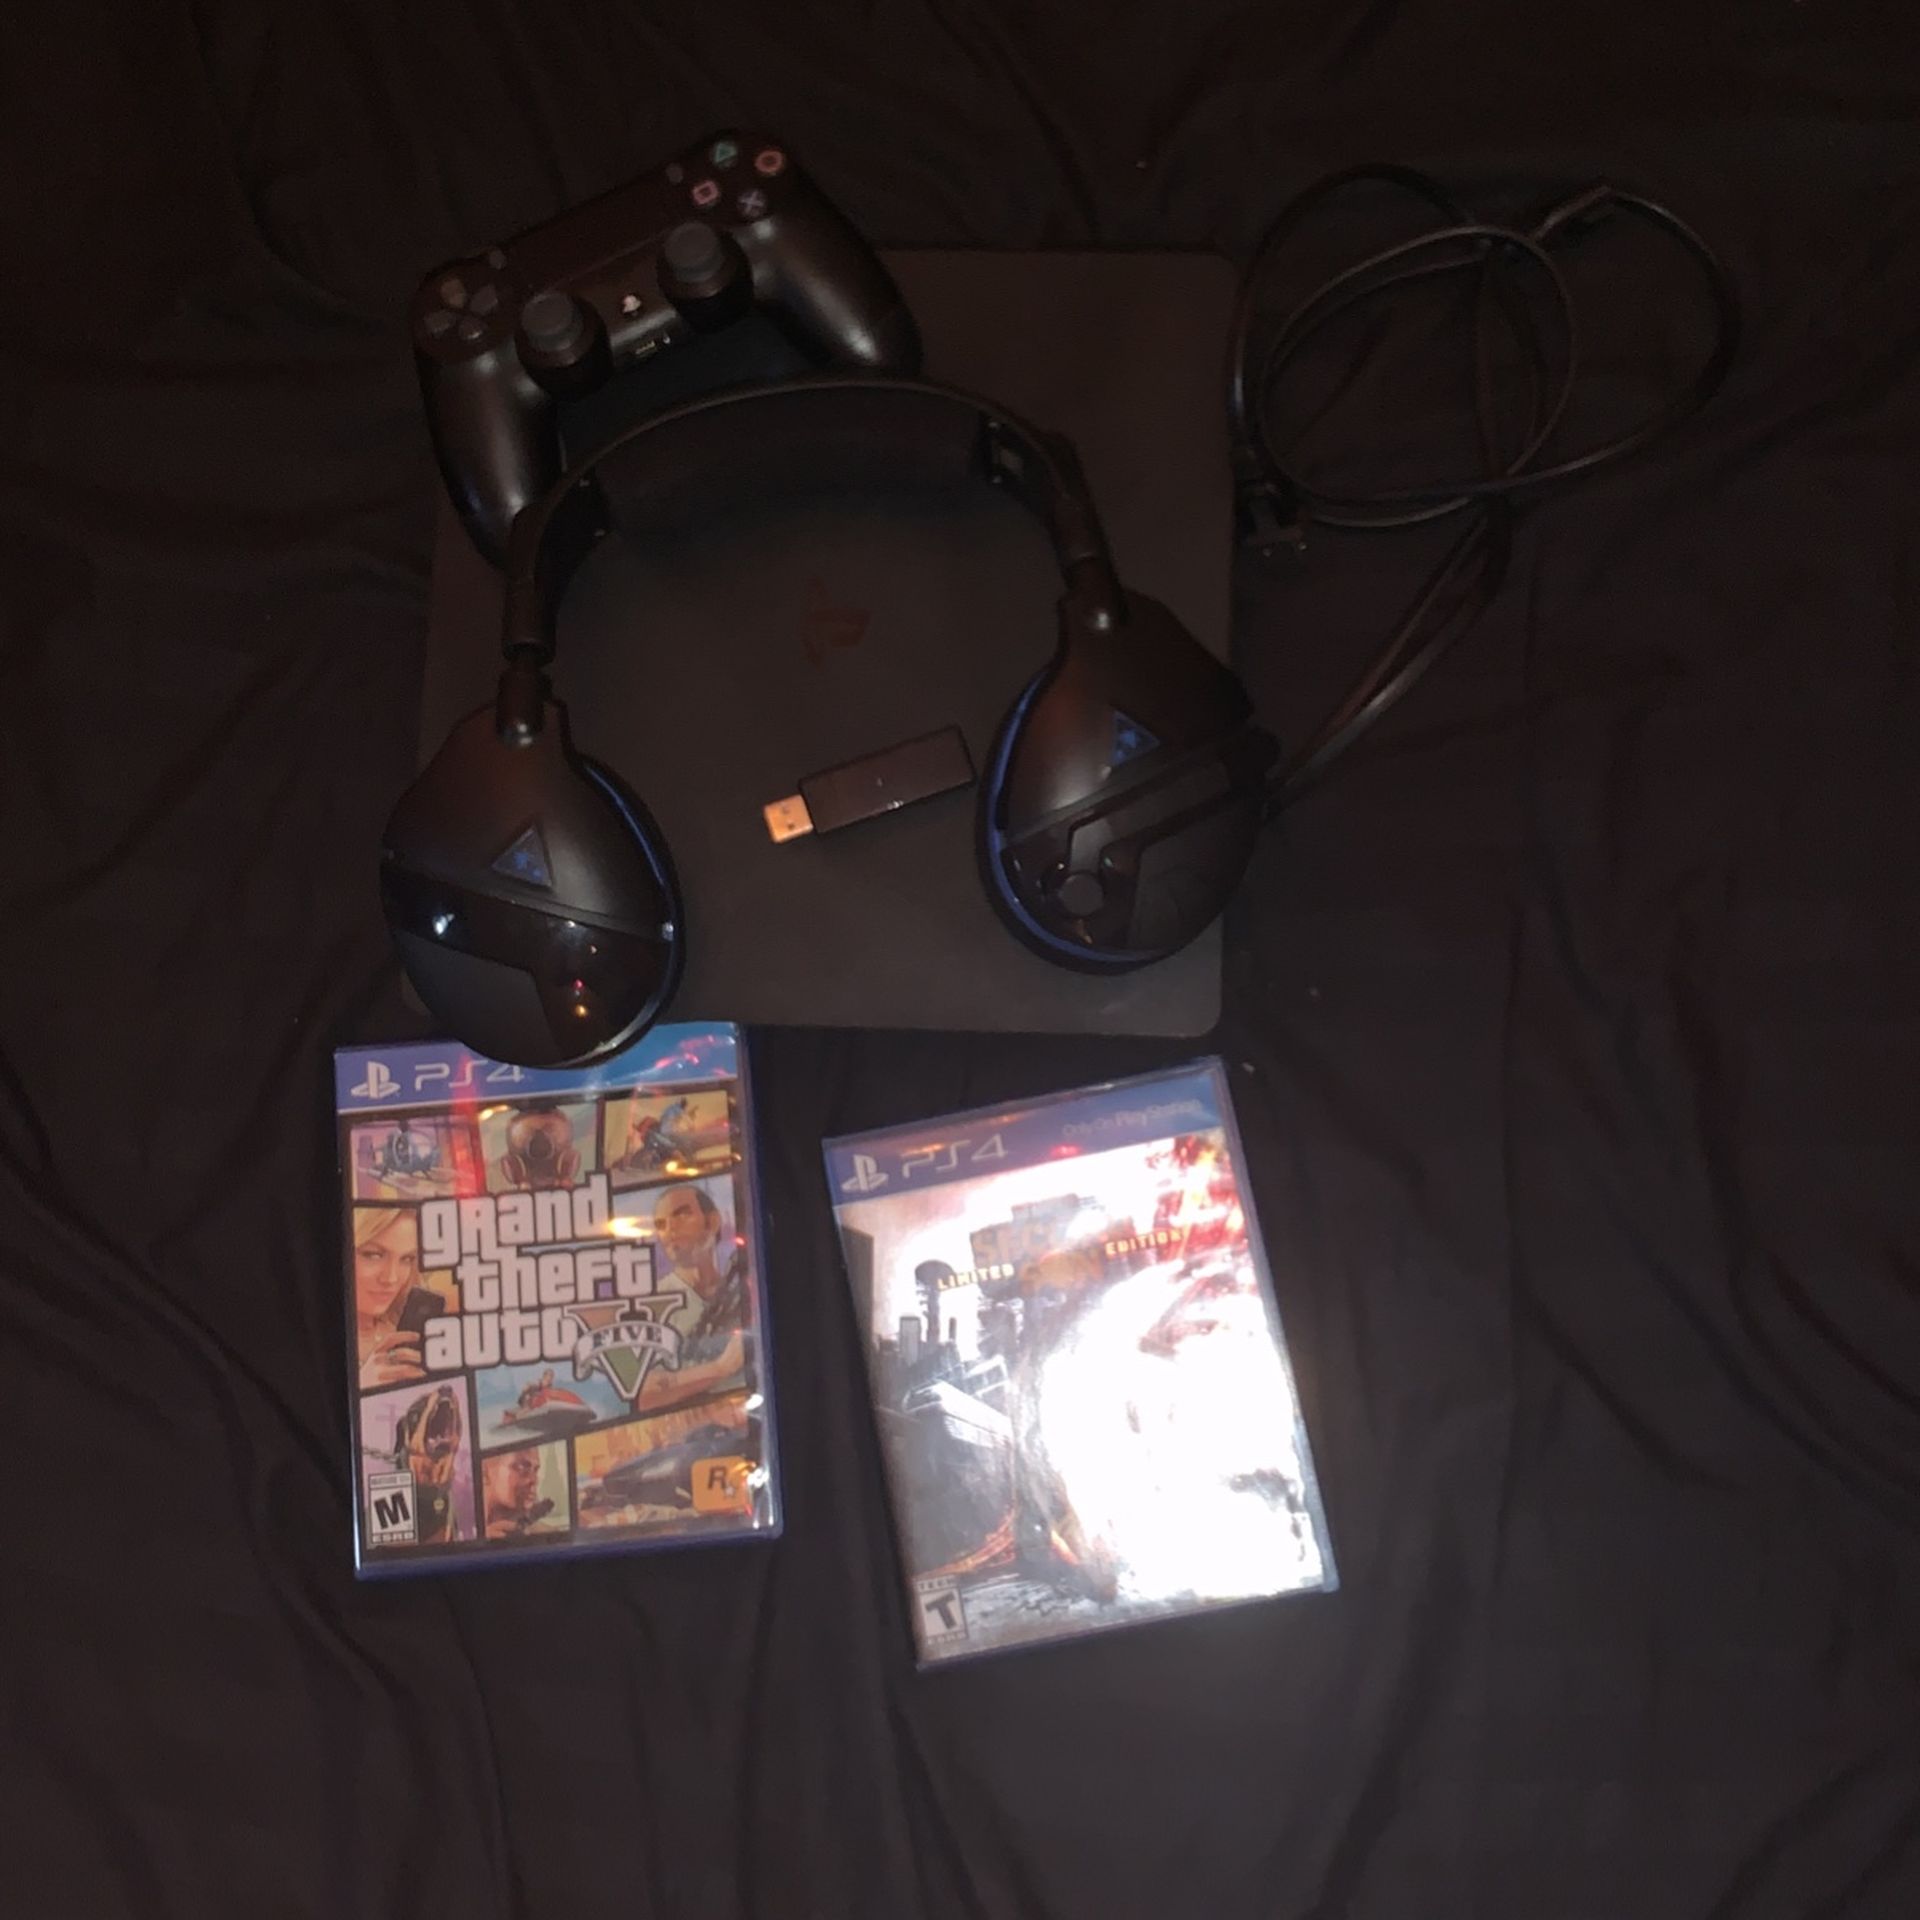 Ps4, Ps4 Headset, Ps4 Controller, Gta 5, Second Son Limited Edition